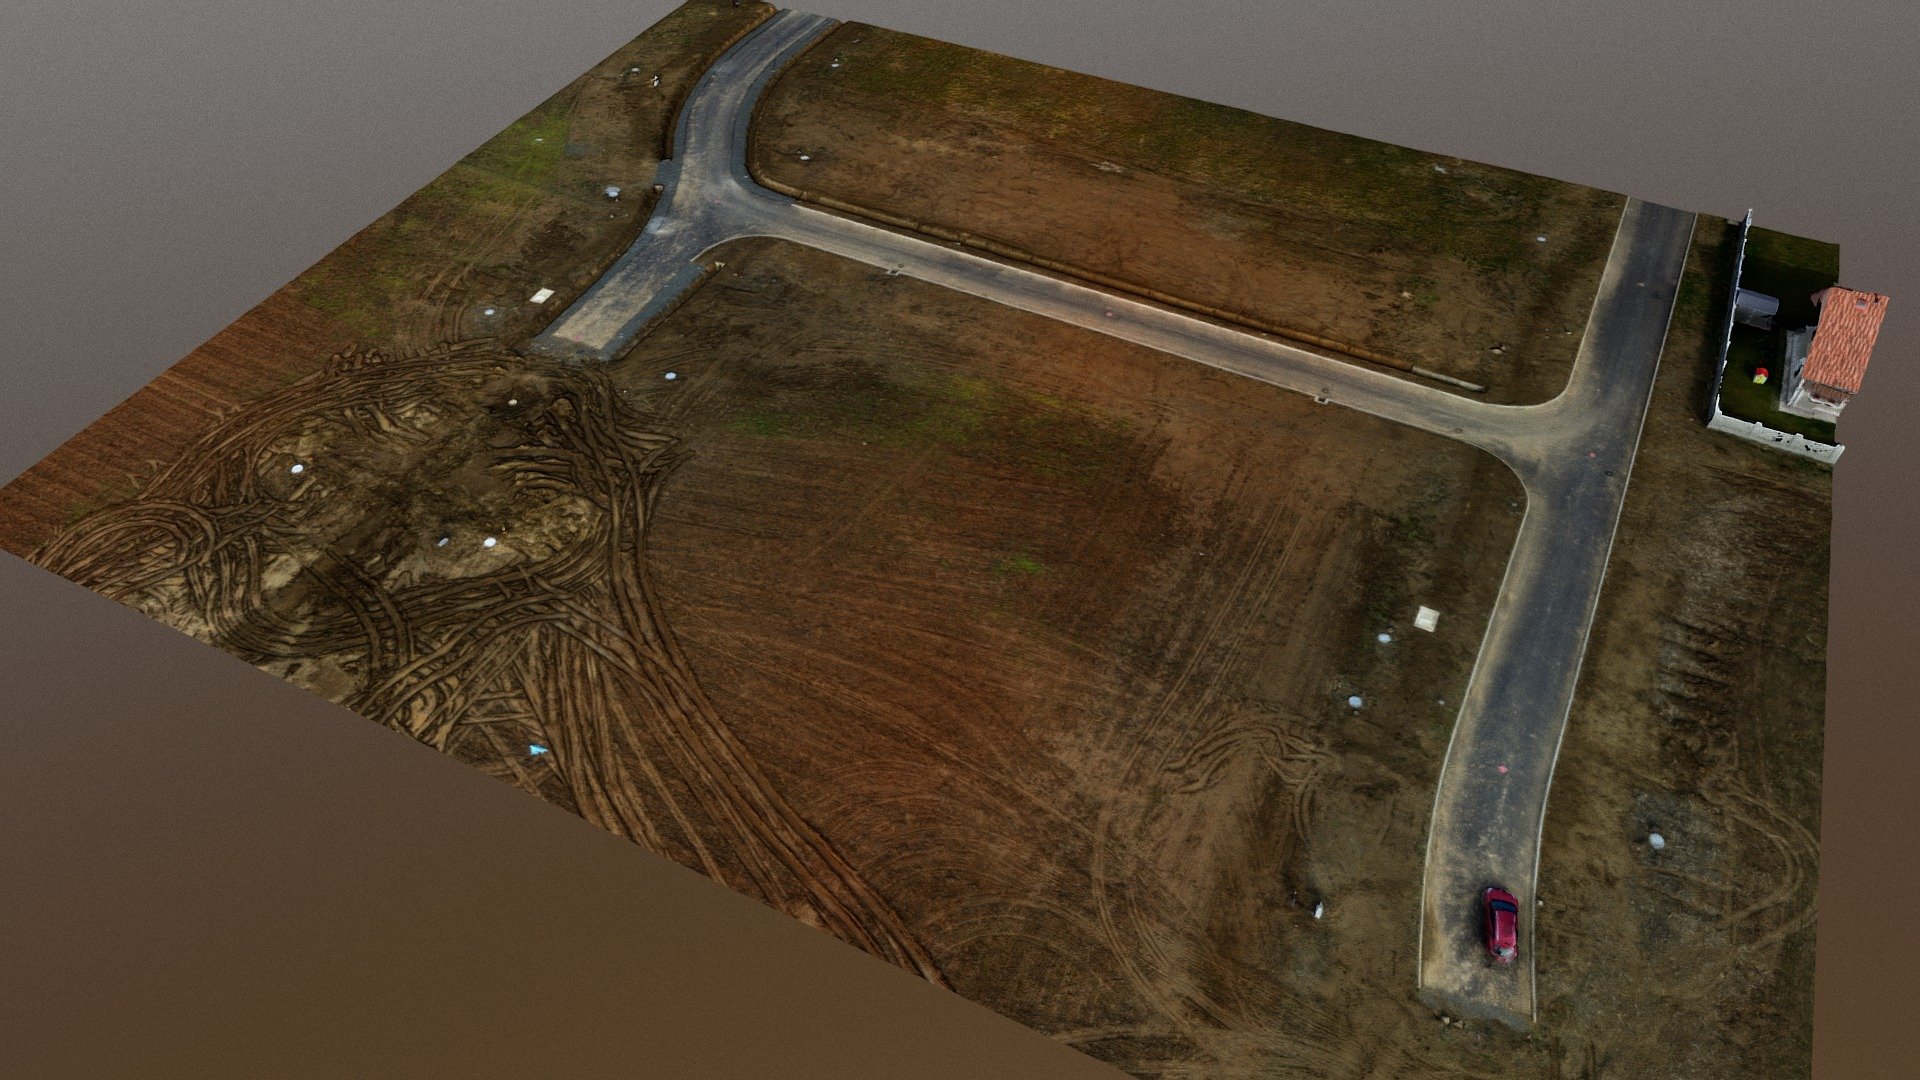 Terrain model of a parcel in Kozarmisleny, Hungary

It's flat&hellip; almost. But has some slope. My client wanted a pointcloud and an ortophoto&hellip; then he got it.

The model was created from 94 DJI Pahantom 3 Pro images, 5 gcps, and with WebODM - Terrain model Kozarmisleny, Hungary - 3D model by Faludi Zoltán, IntelliGEO (@intelligeo) 3d model